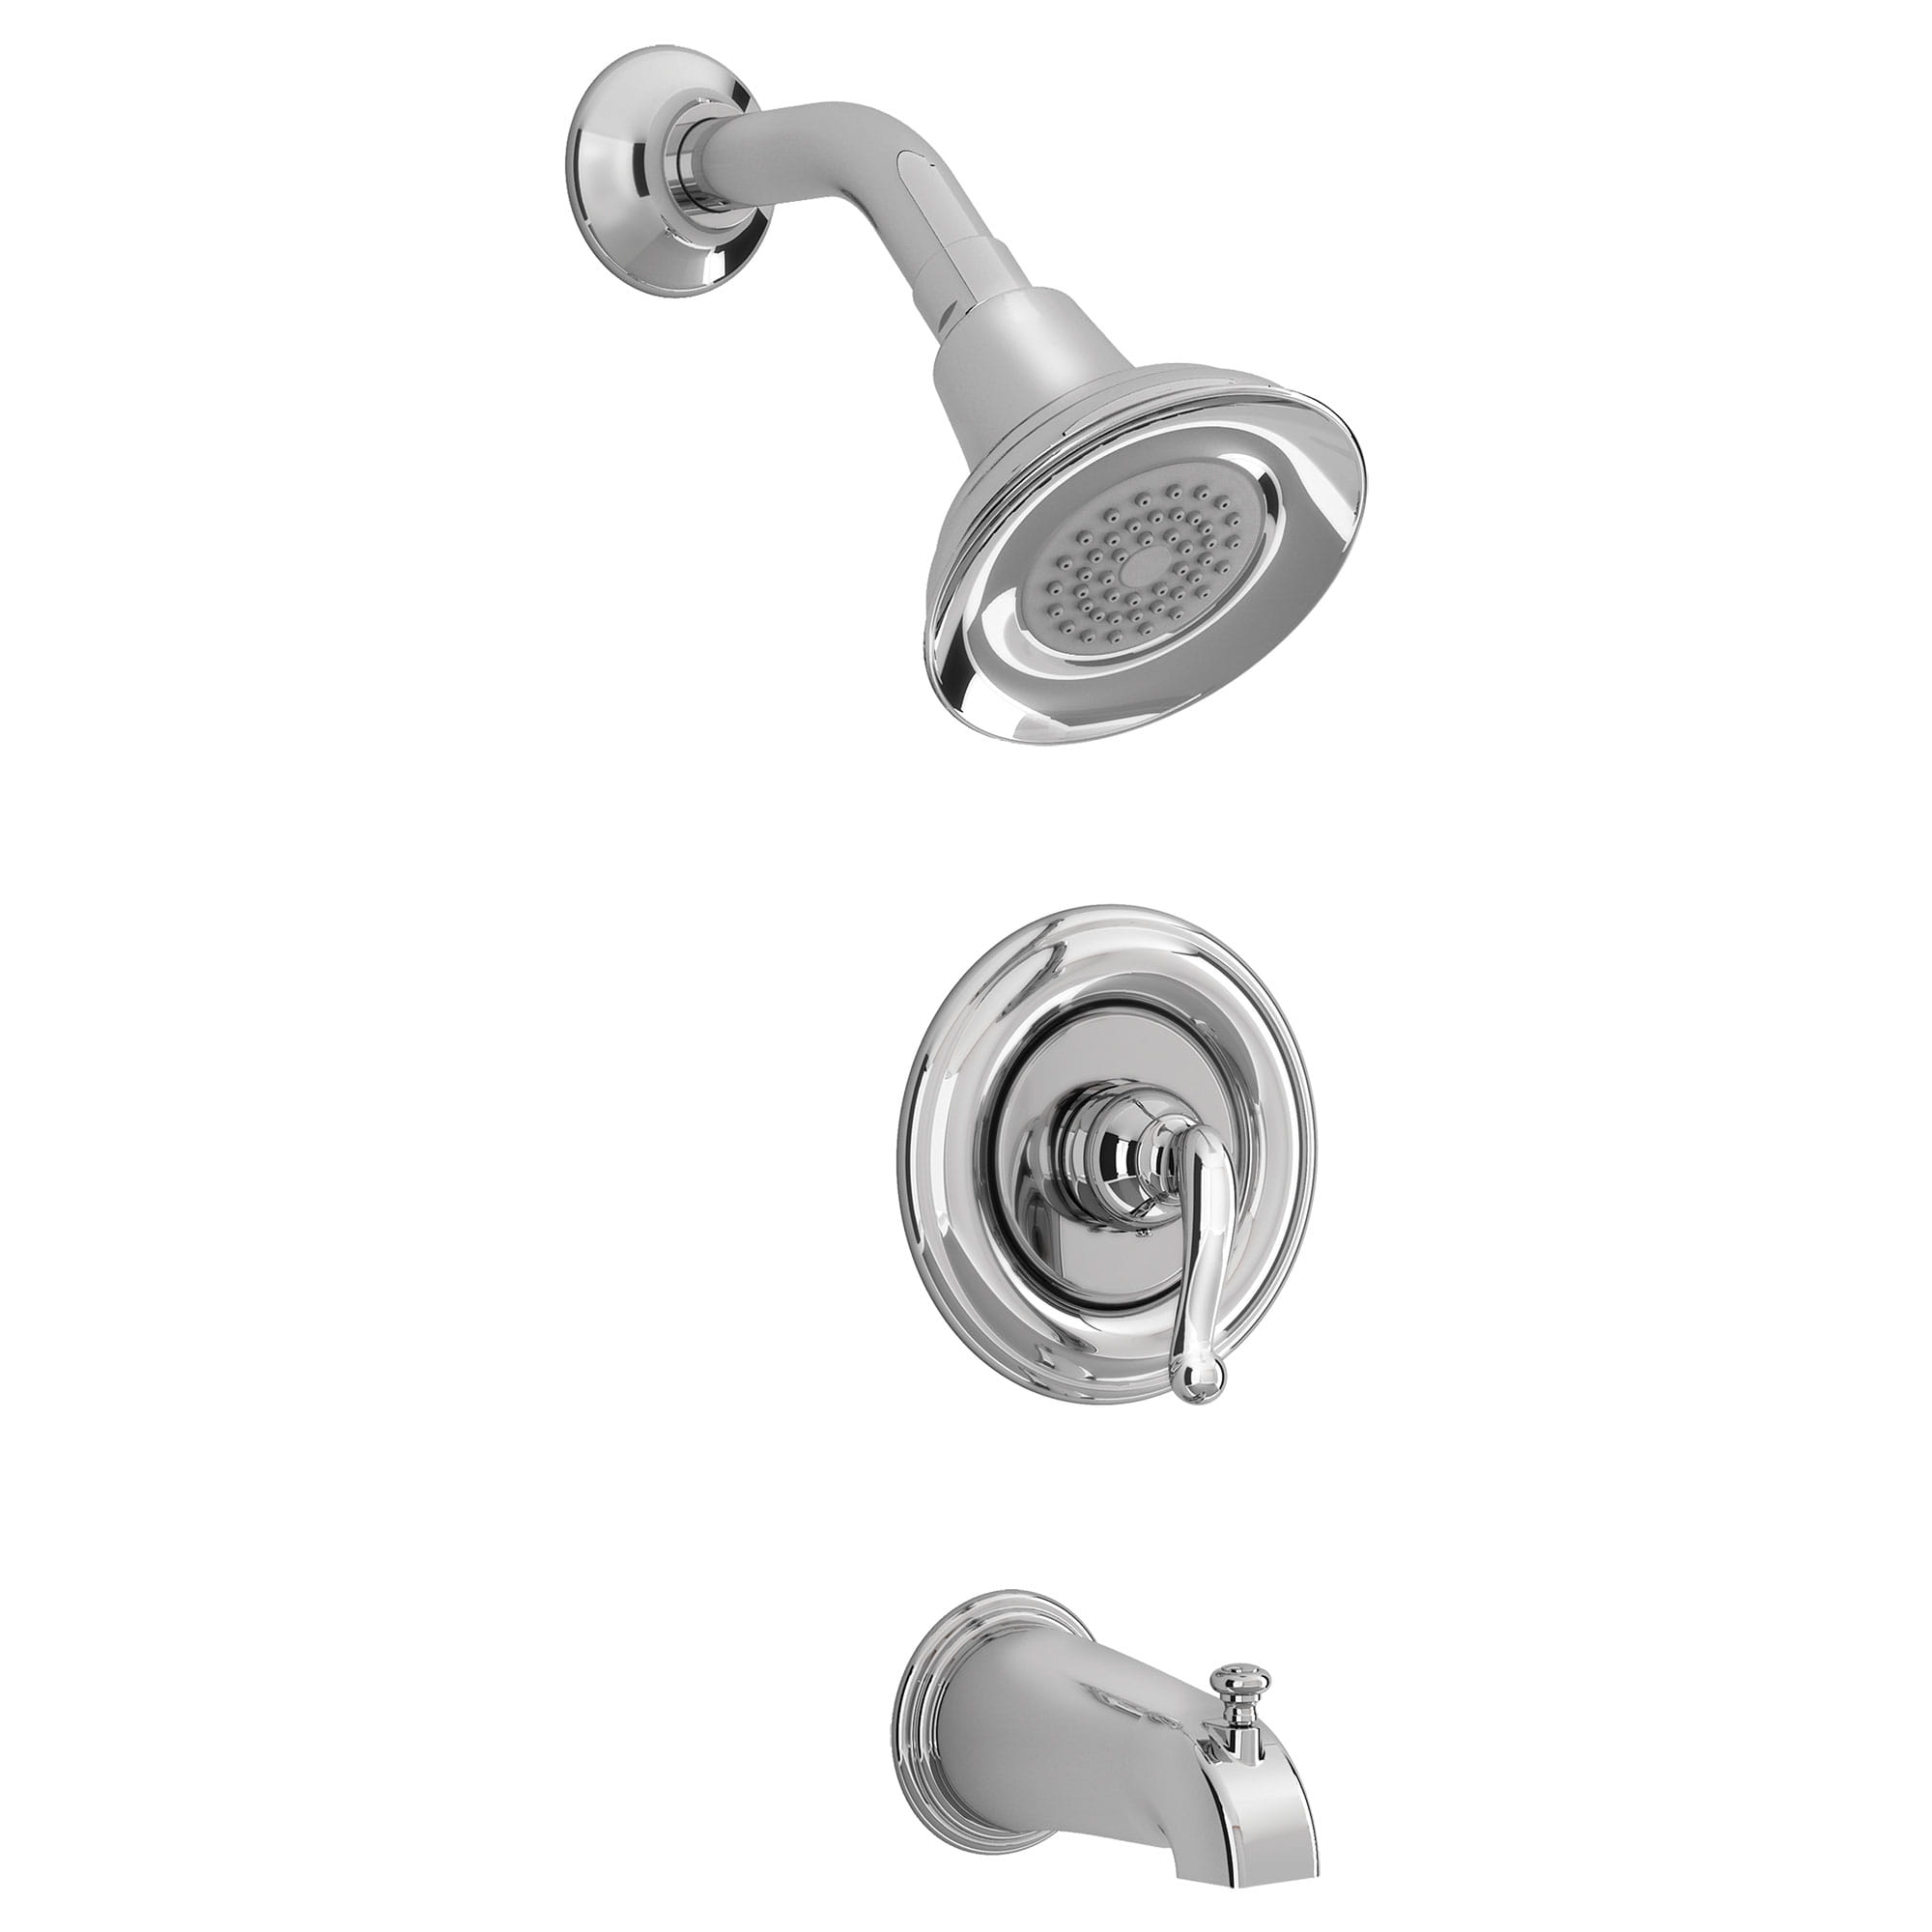 Winthrop 2.5 GPM Tub and Shower Trim Kit with Pressure Balance Valve Cartridge and Lever Handles